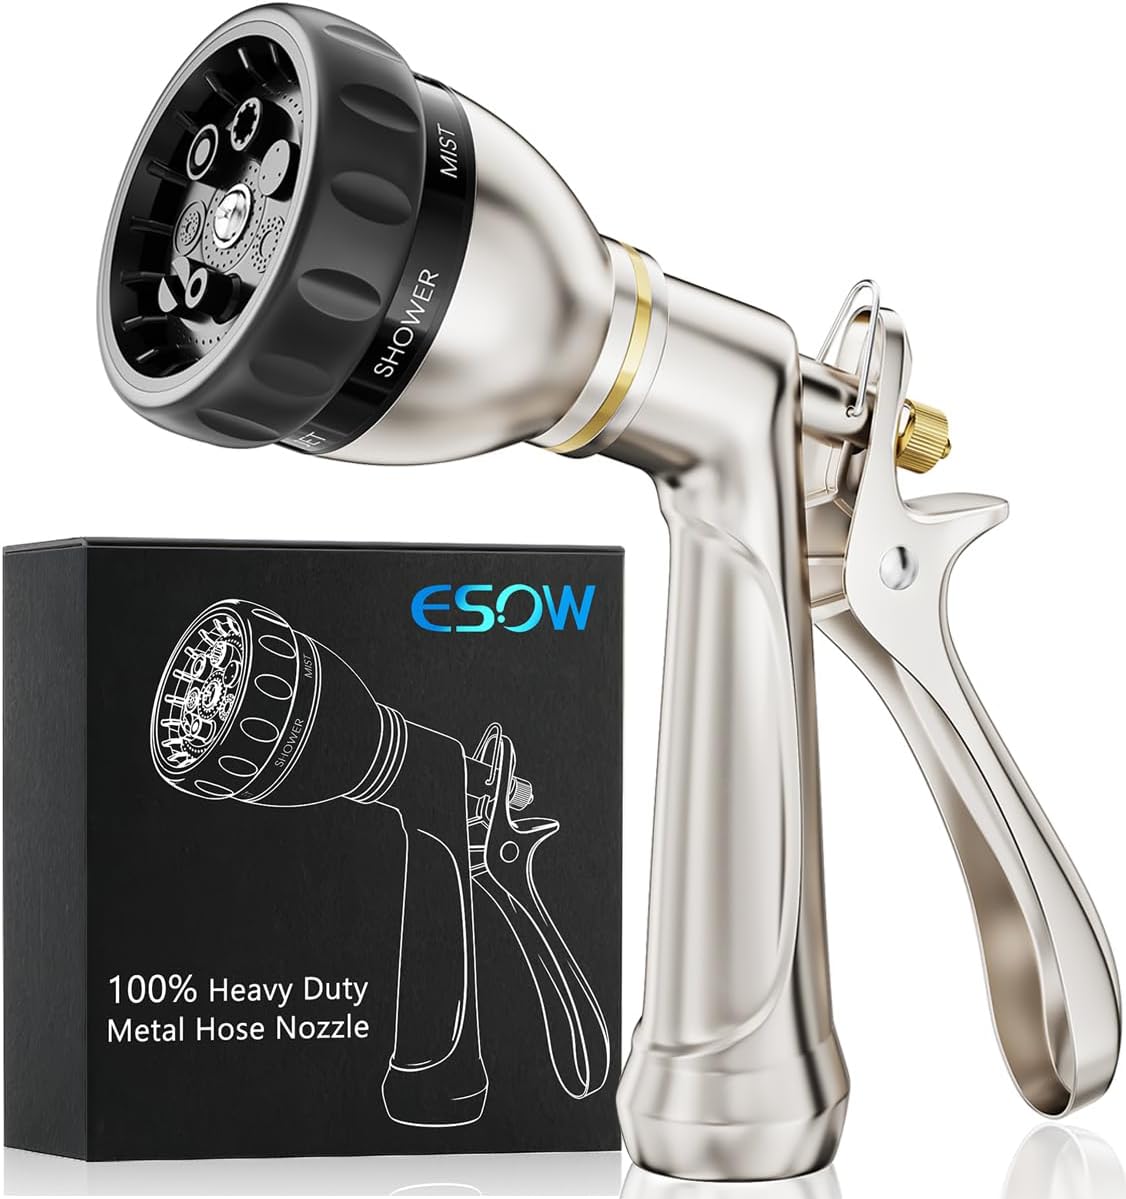 ESOW Garden Hose Nozzle 100% Heavy Duty Metal, Water Hose Sprayer with 7 Watering Patterns, Rear Trigger Design, High Pressure Nozzle Sprayer for Watering Plants, Car and Pet Washing